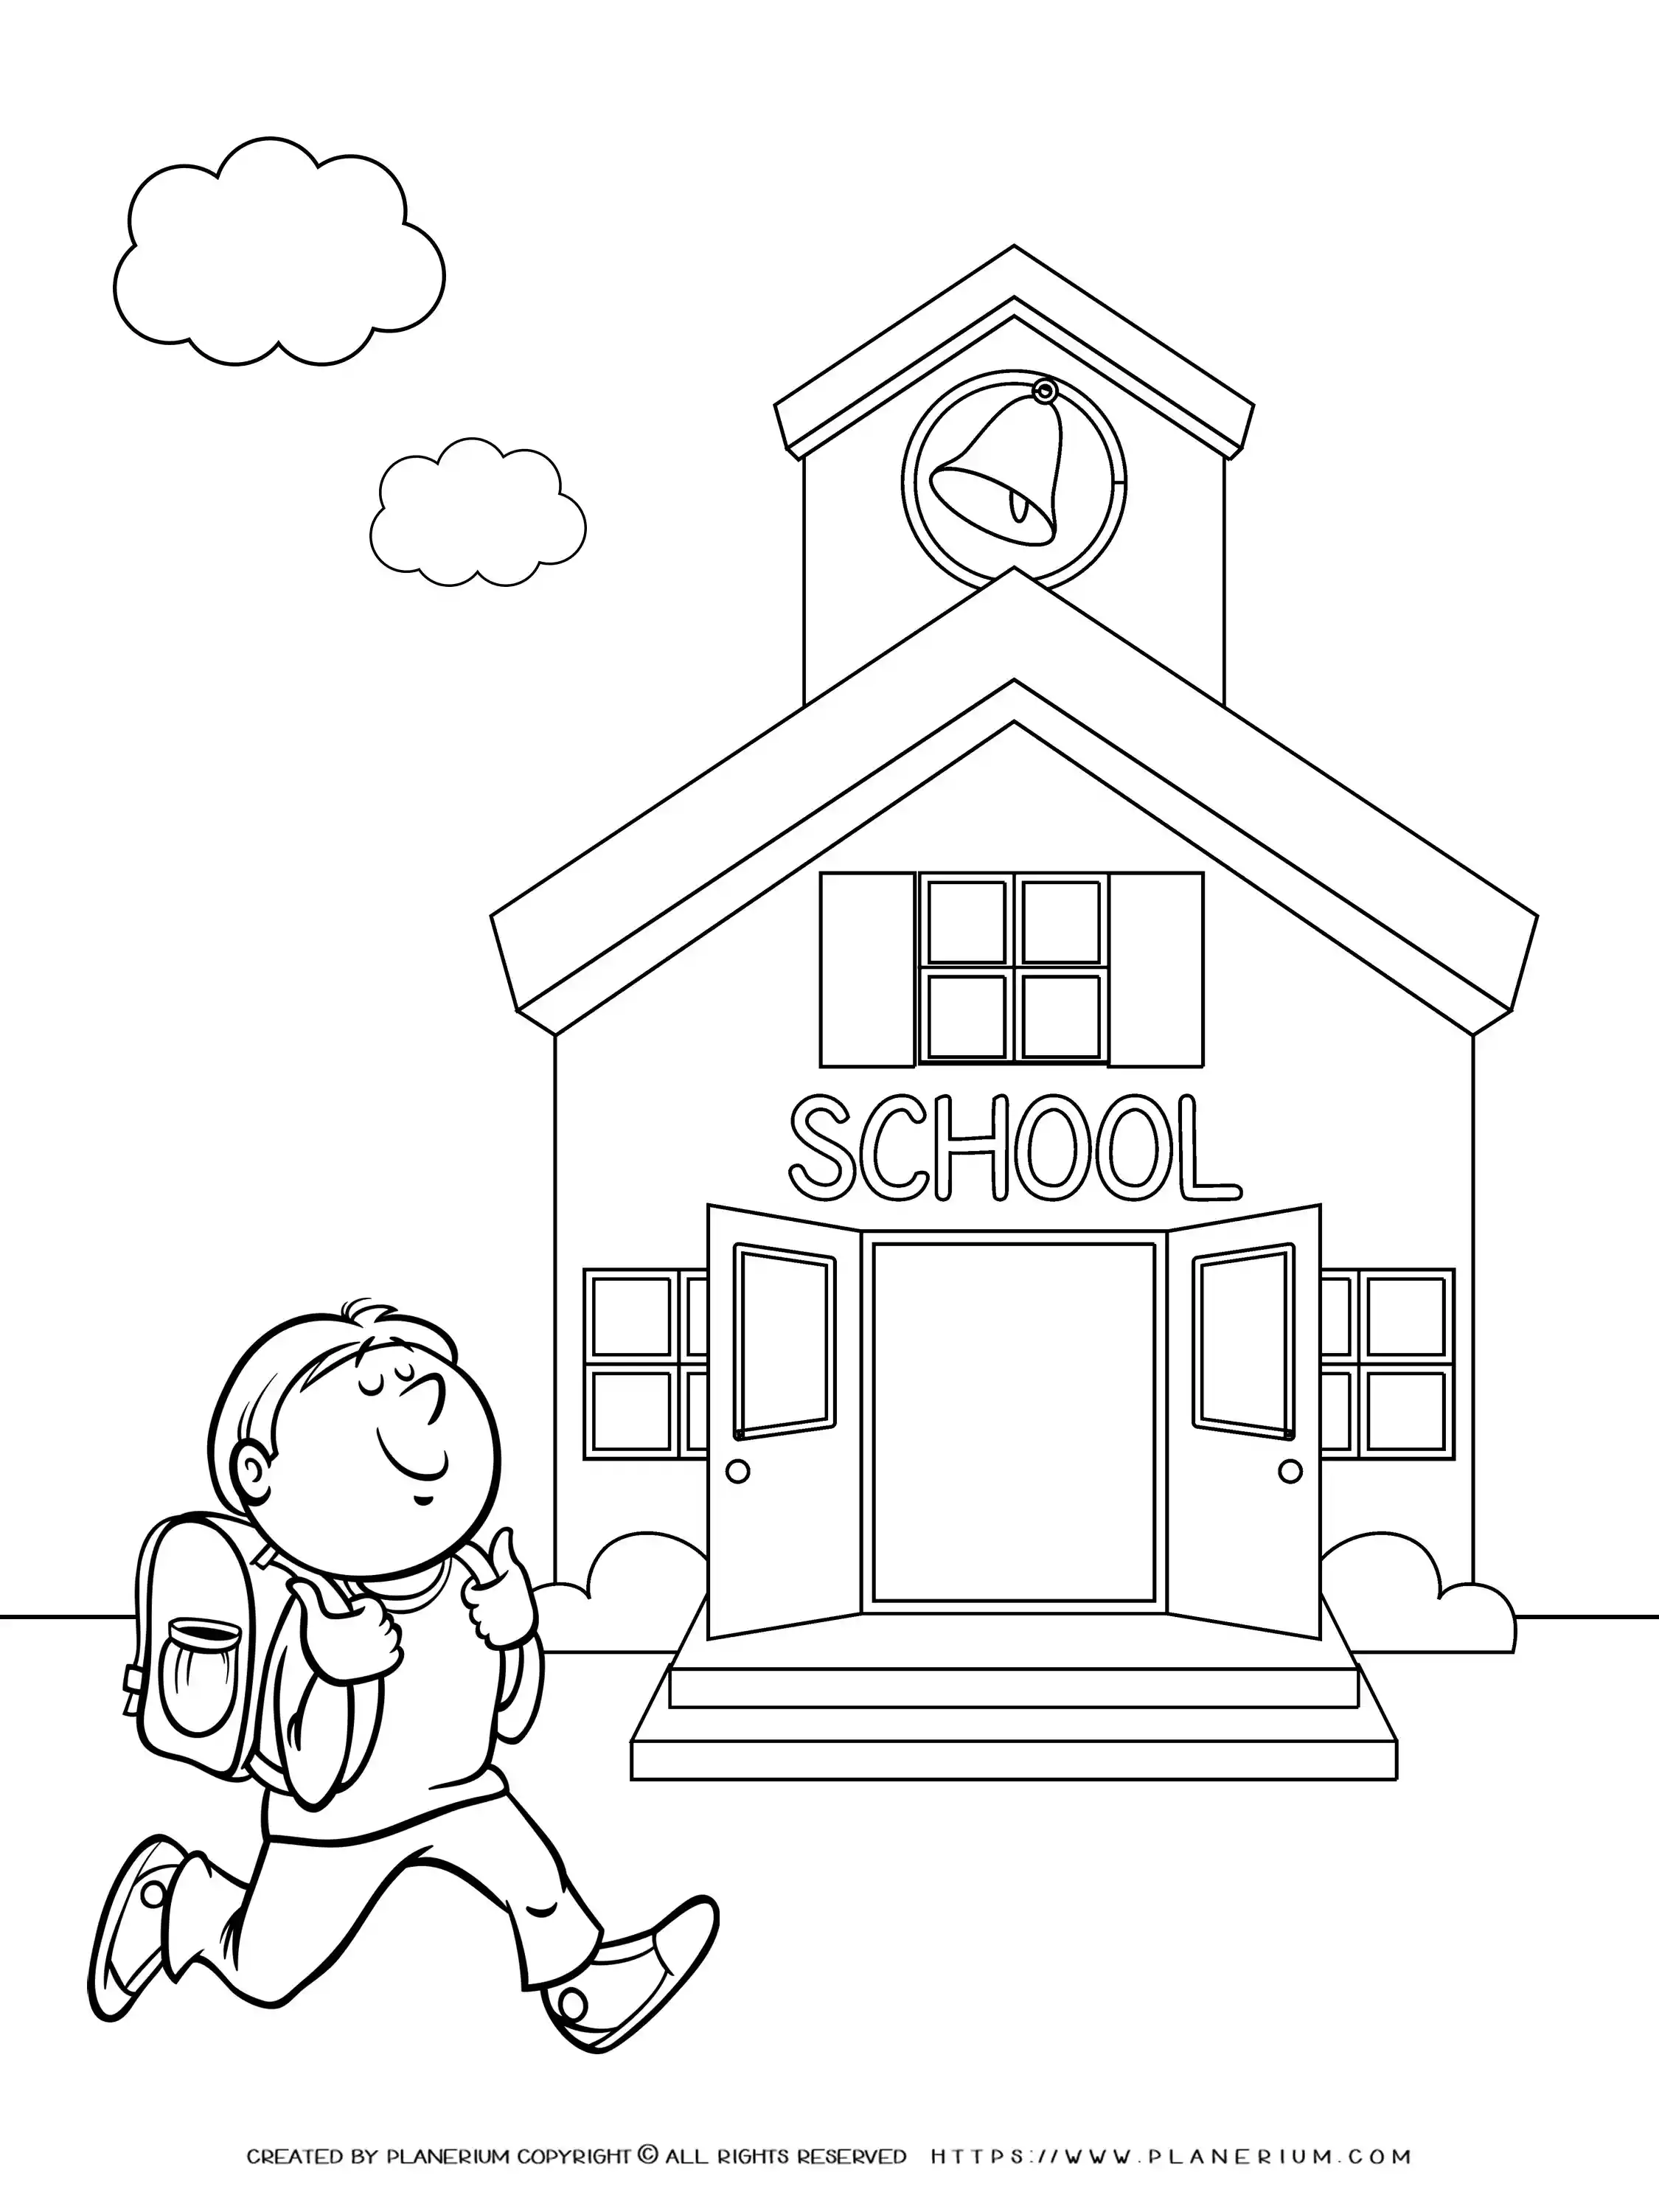 Back to School   Coloring Page   Running to School   Planerium